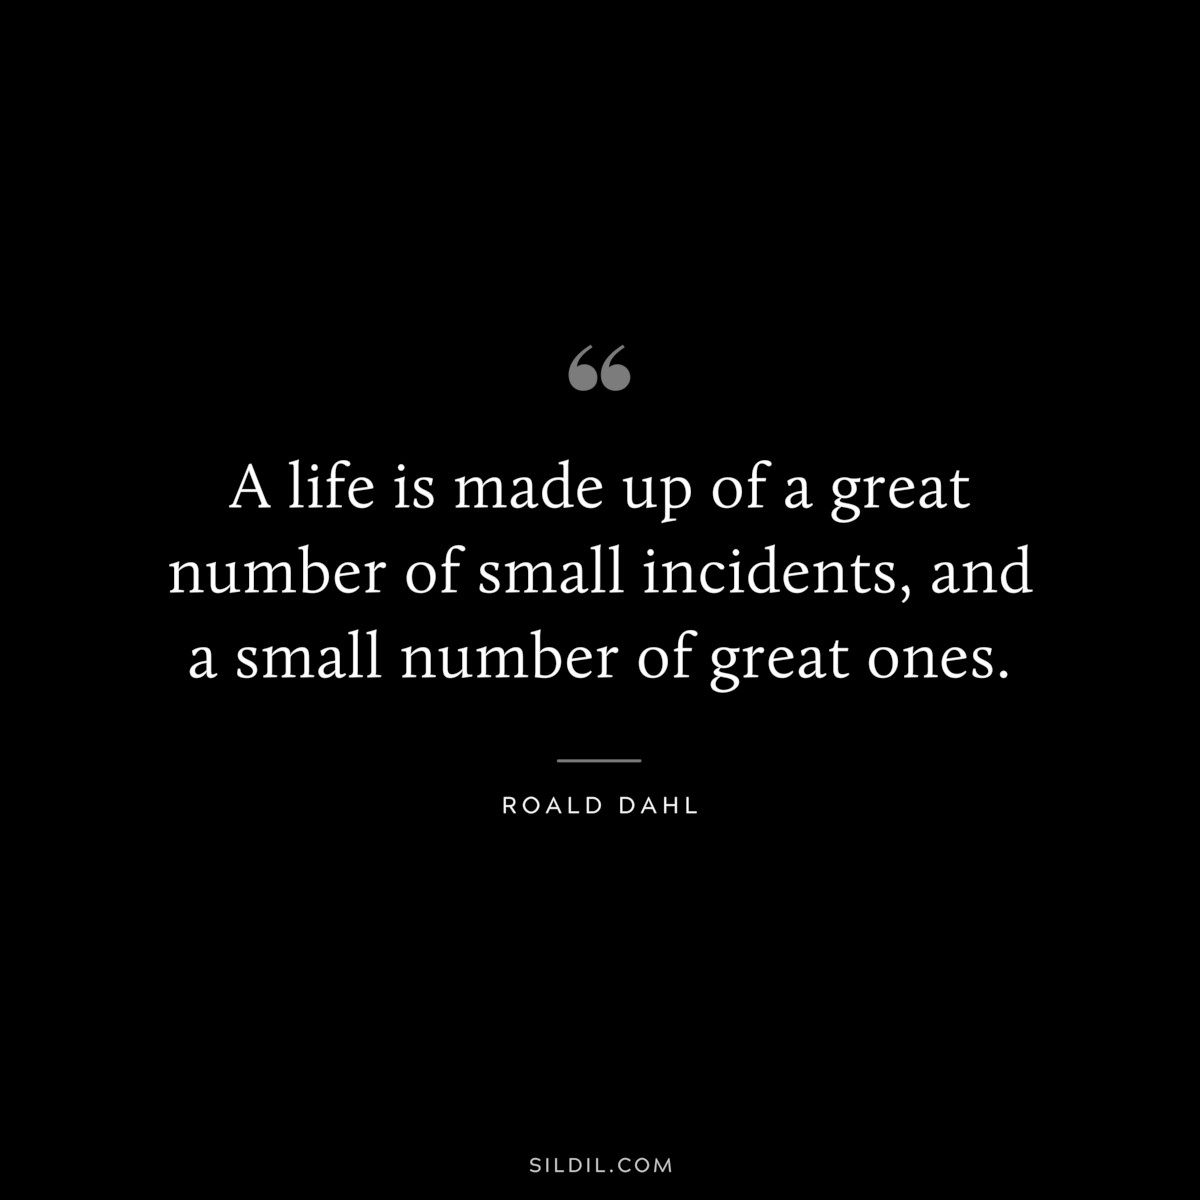 A life is made up of a great number of small incidents, and a small number of great ones. ― Roald Dahl